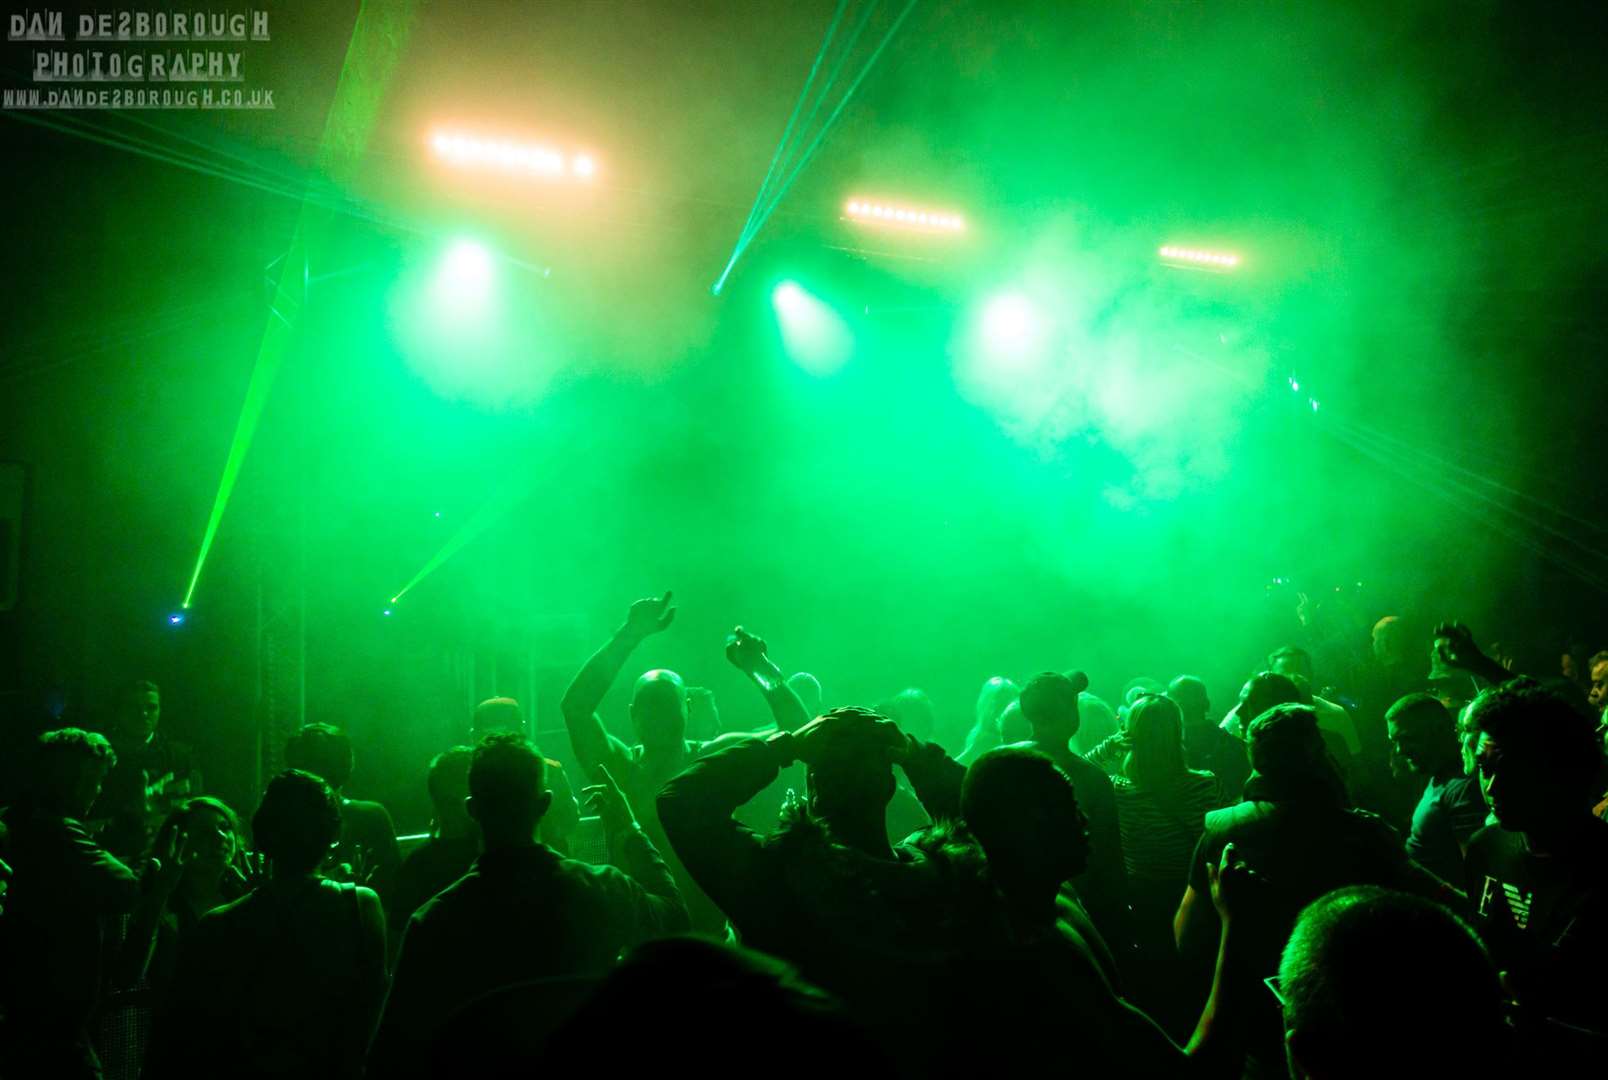 The rave lasted for 12 hours straight. Picture: Dan Desborough